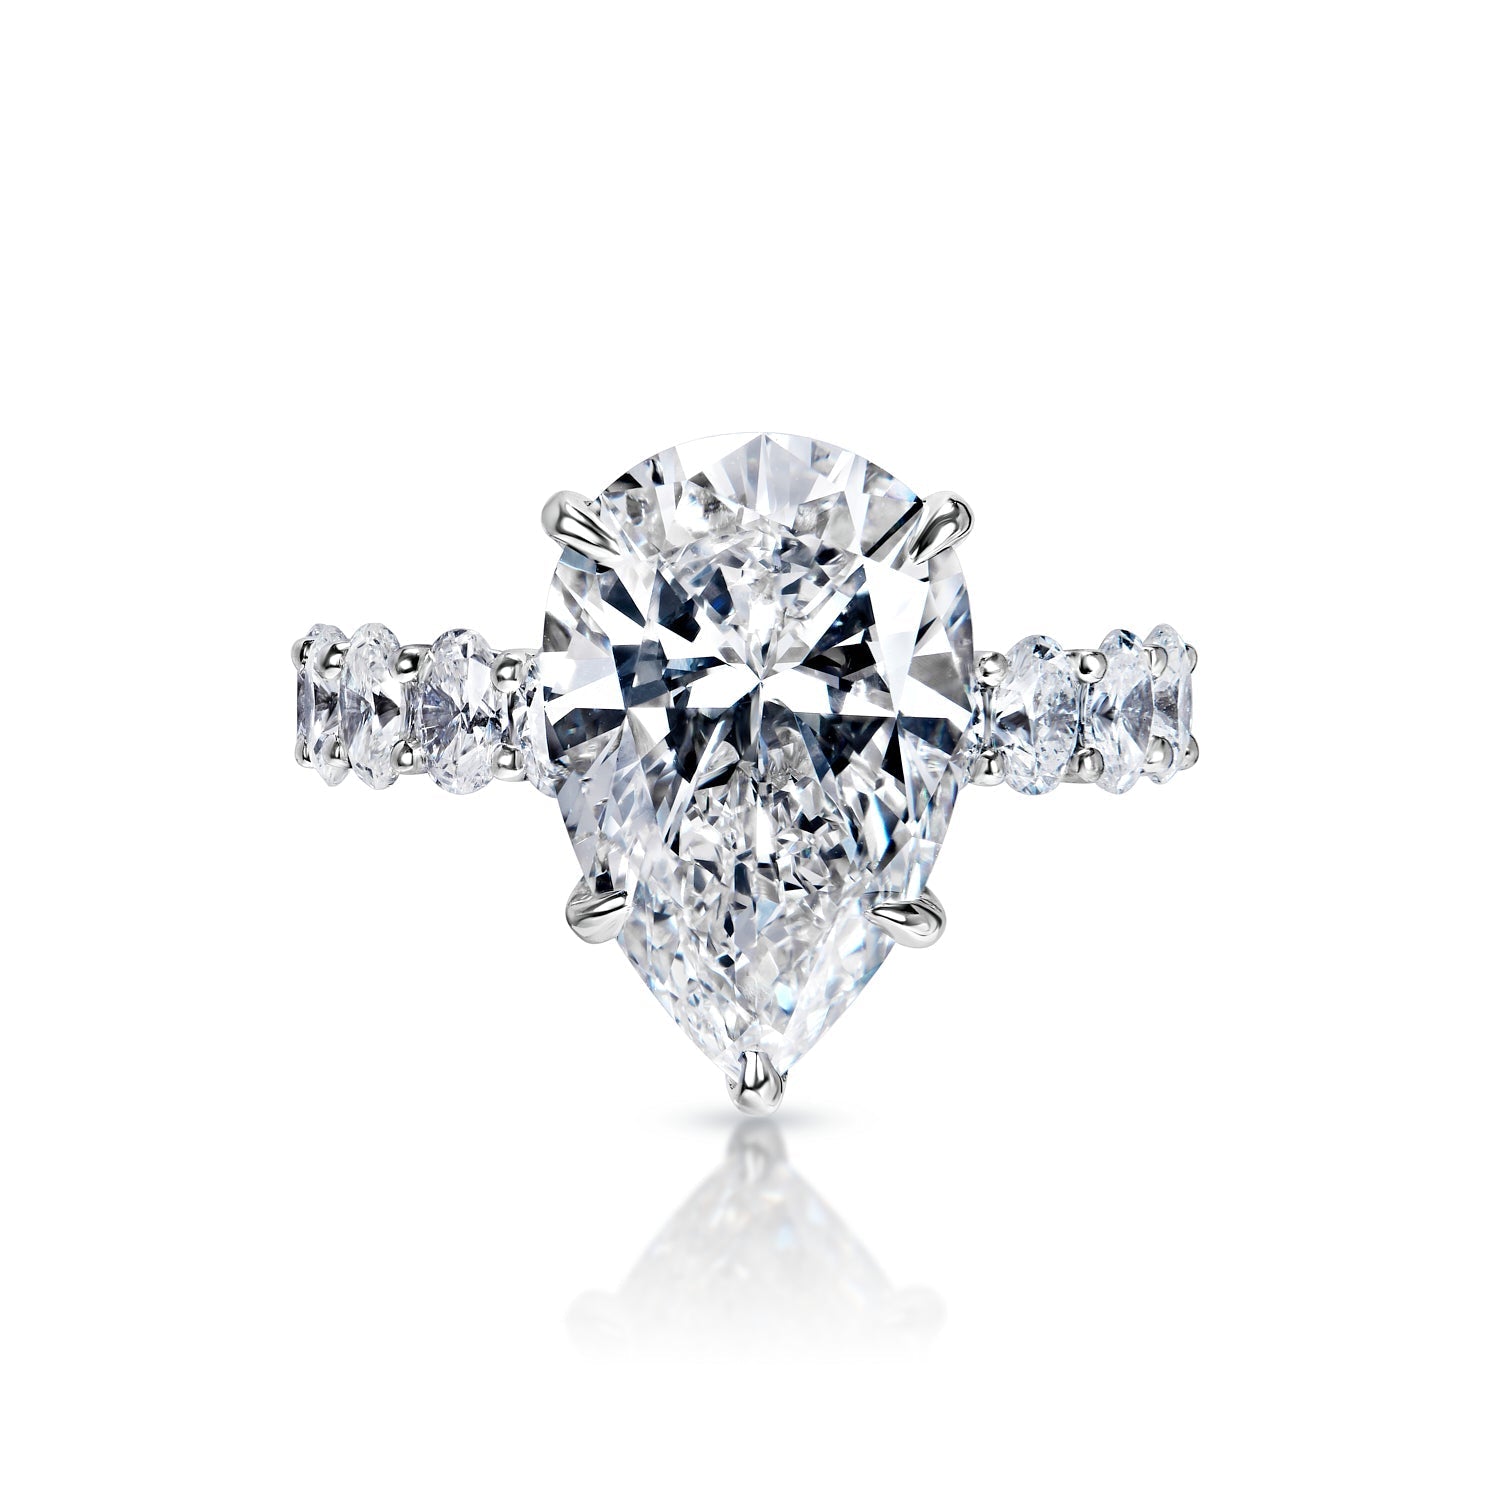 Ellianna 8 Carat H Internally Flawless Pear Shape Diamond Engagement Ring in 18k White Gold Front View